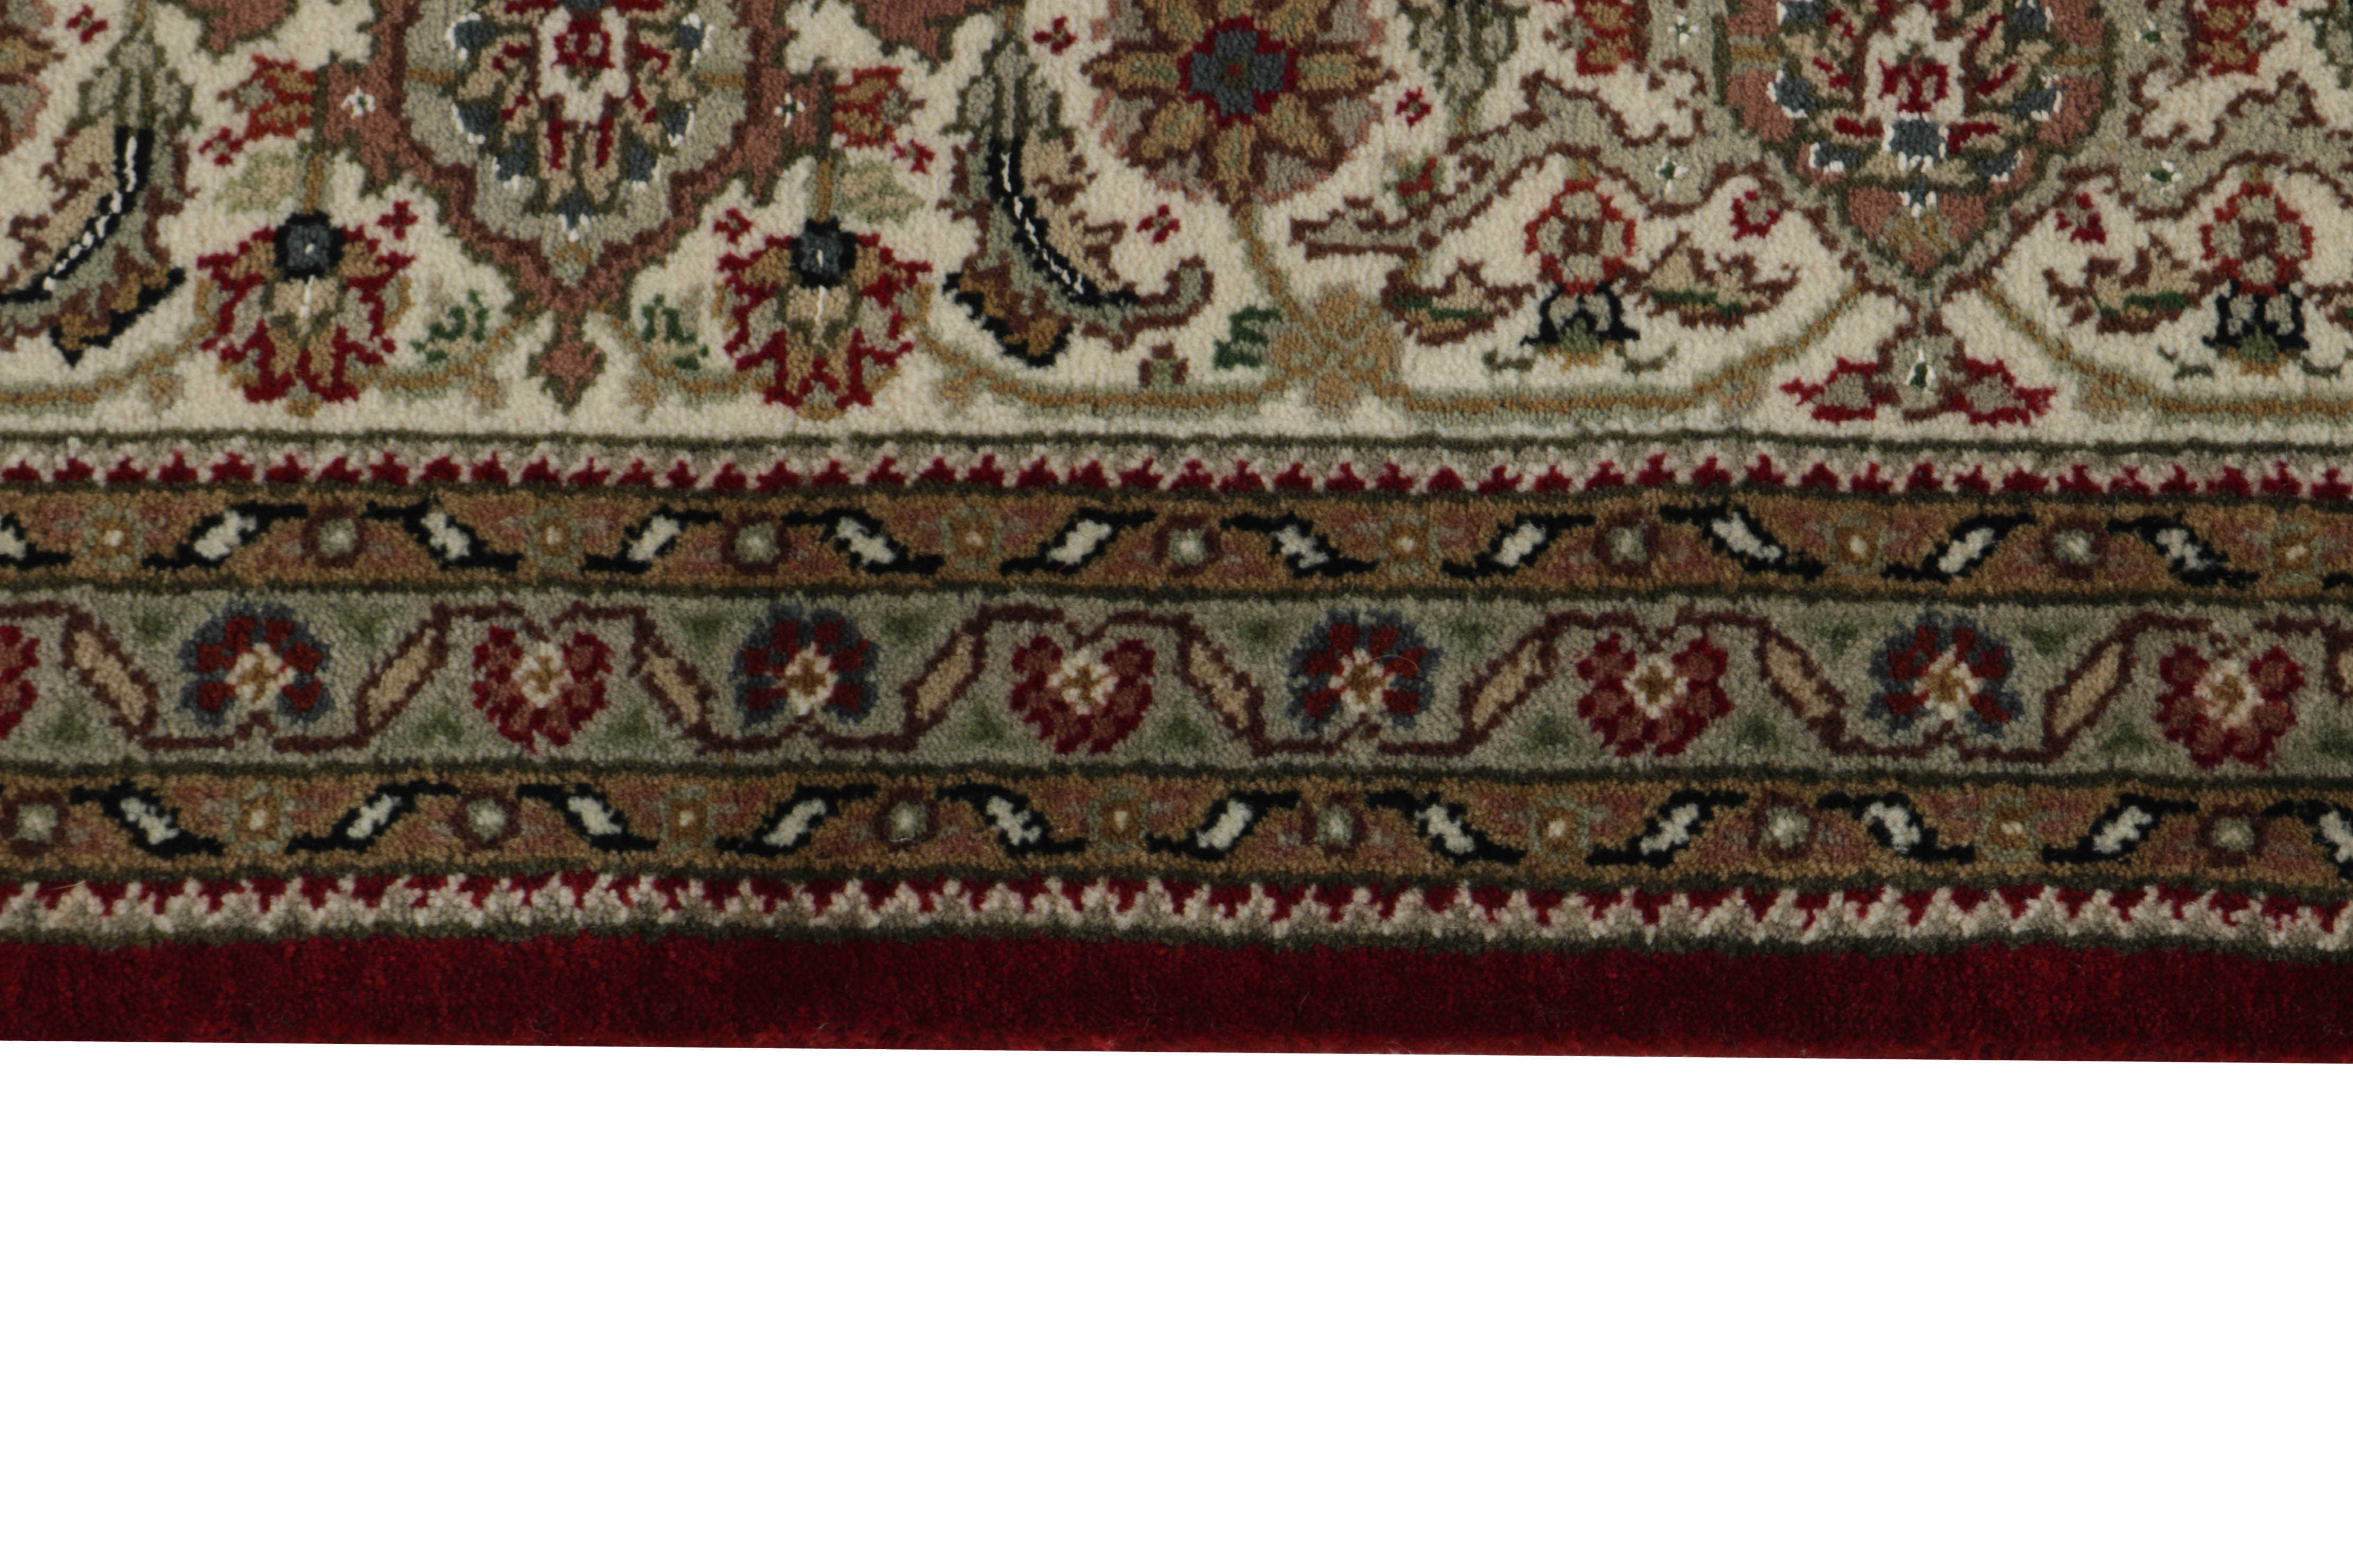 Authentic Oriental rug with traditional geometric and floral design in grey